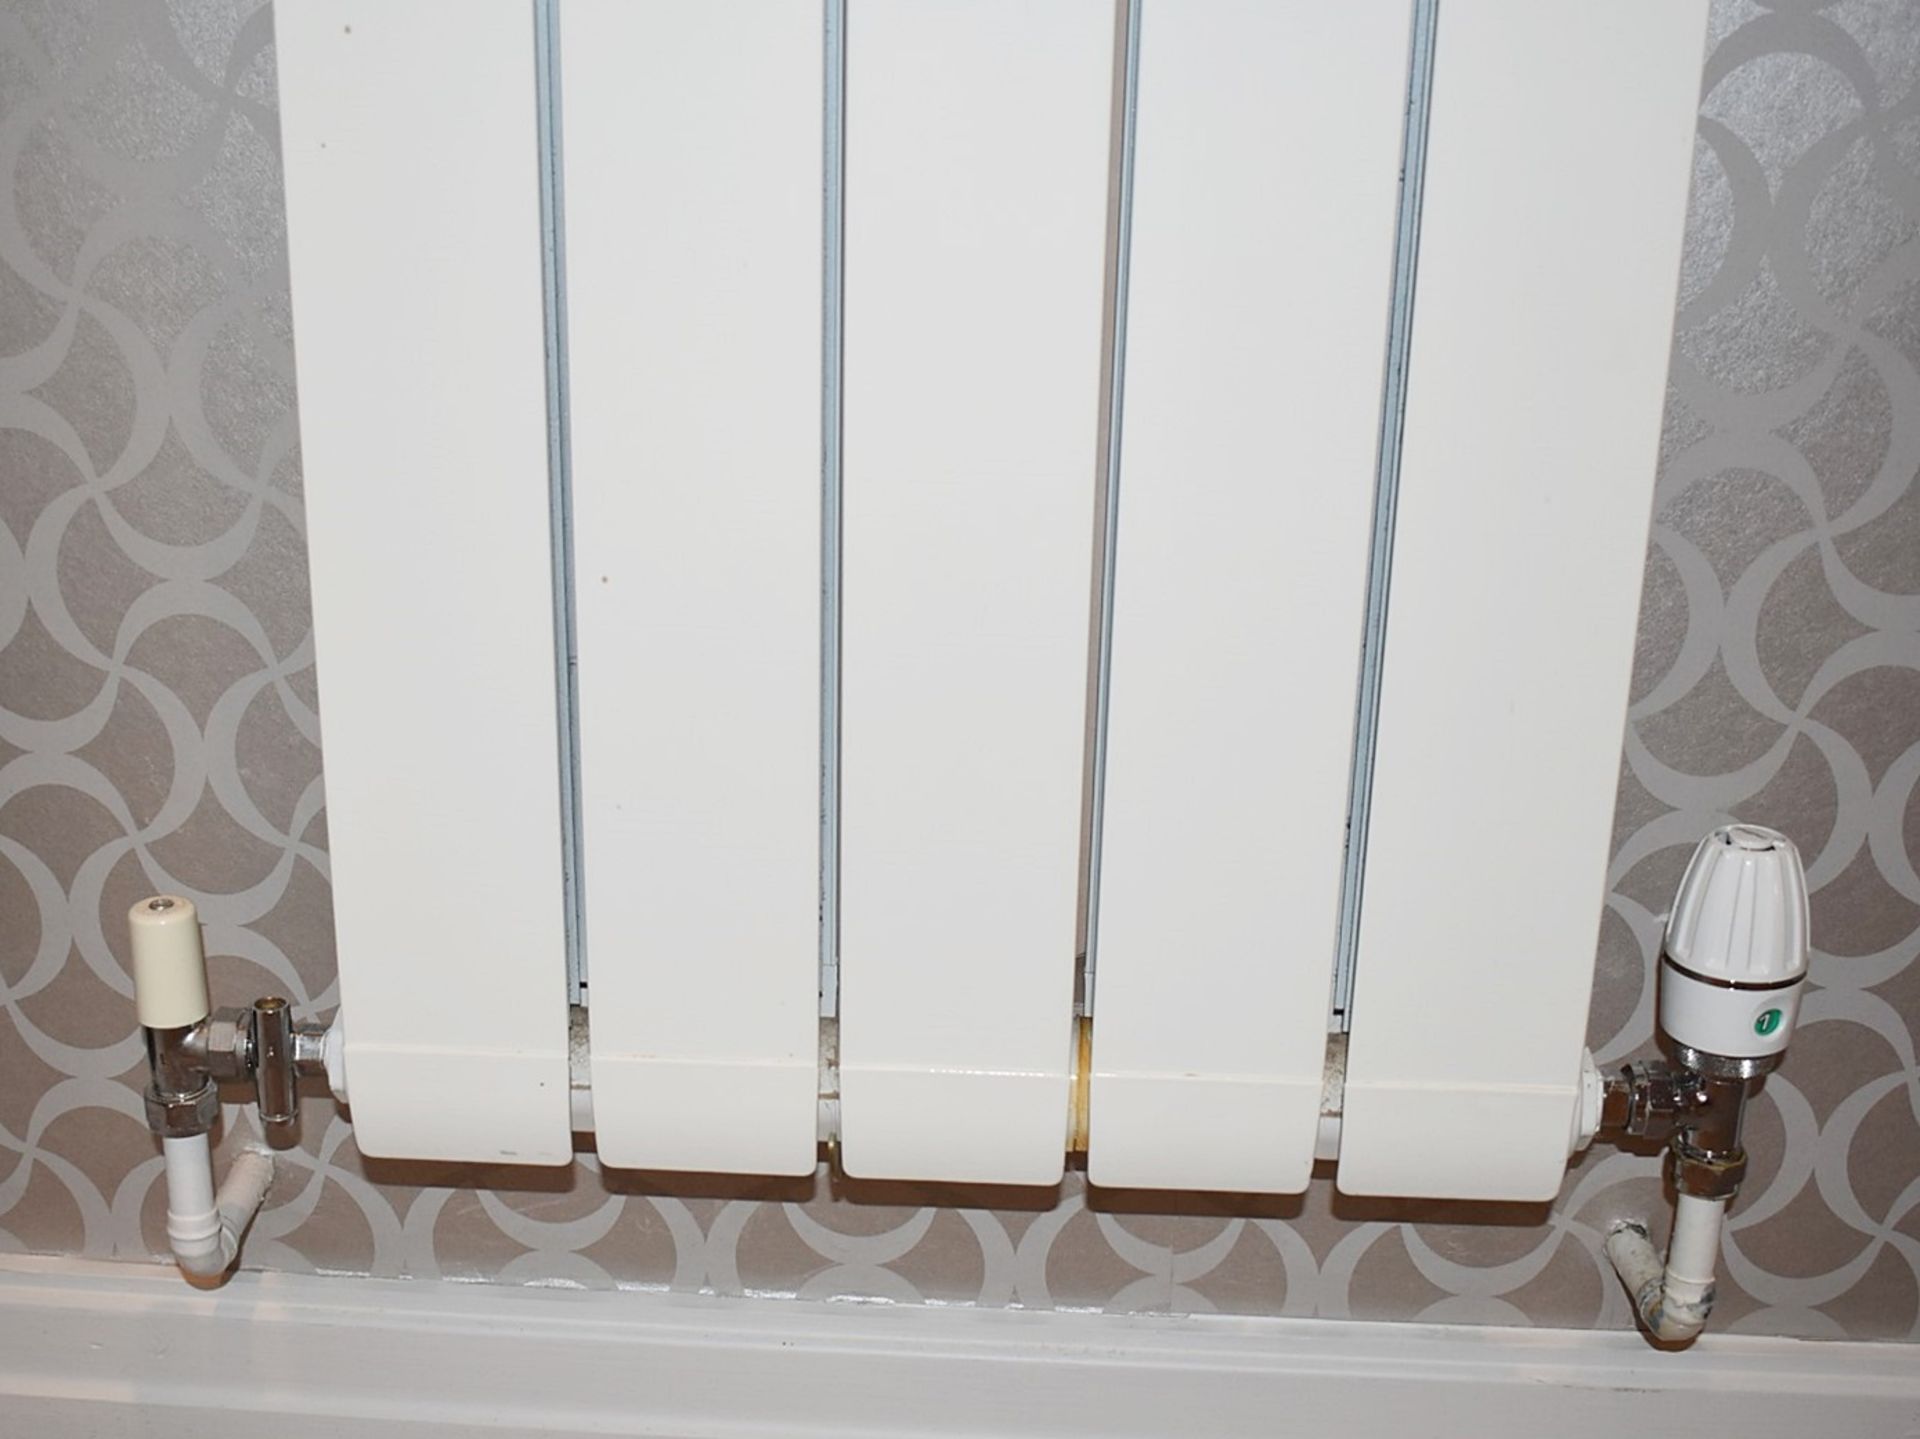 4 x Single Panel Vertical Wall Mounted Radiators - Ref: RR10 / LNG - CL781 - Location: Hale Barns - Image 7 of 8